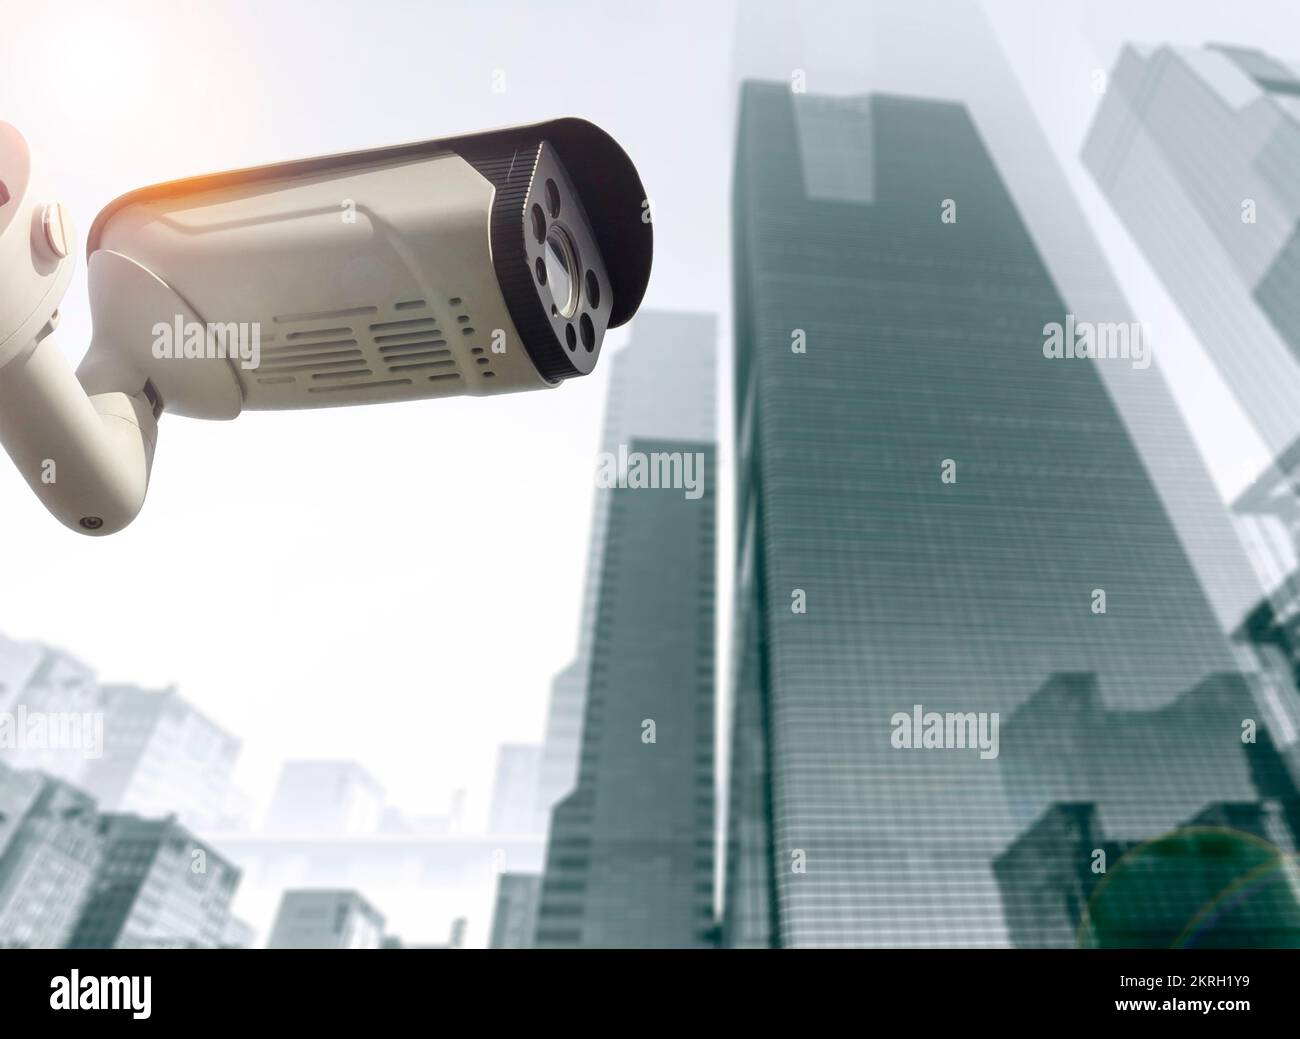 City security concept, CCTV camera in front of high tech business skyscrapers Stock Photo